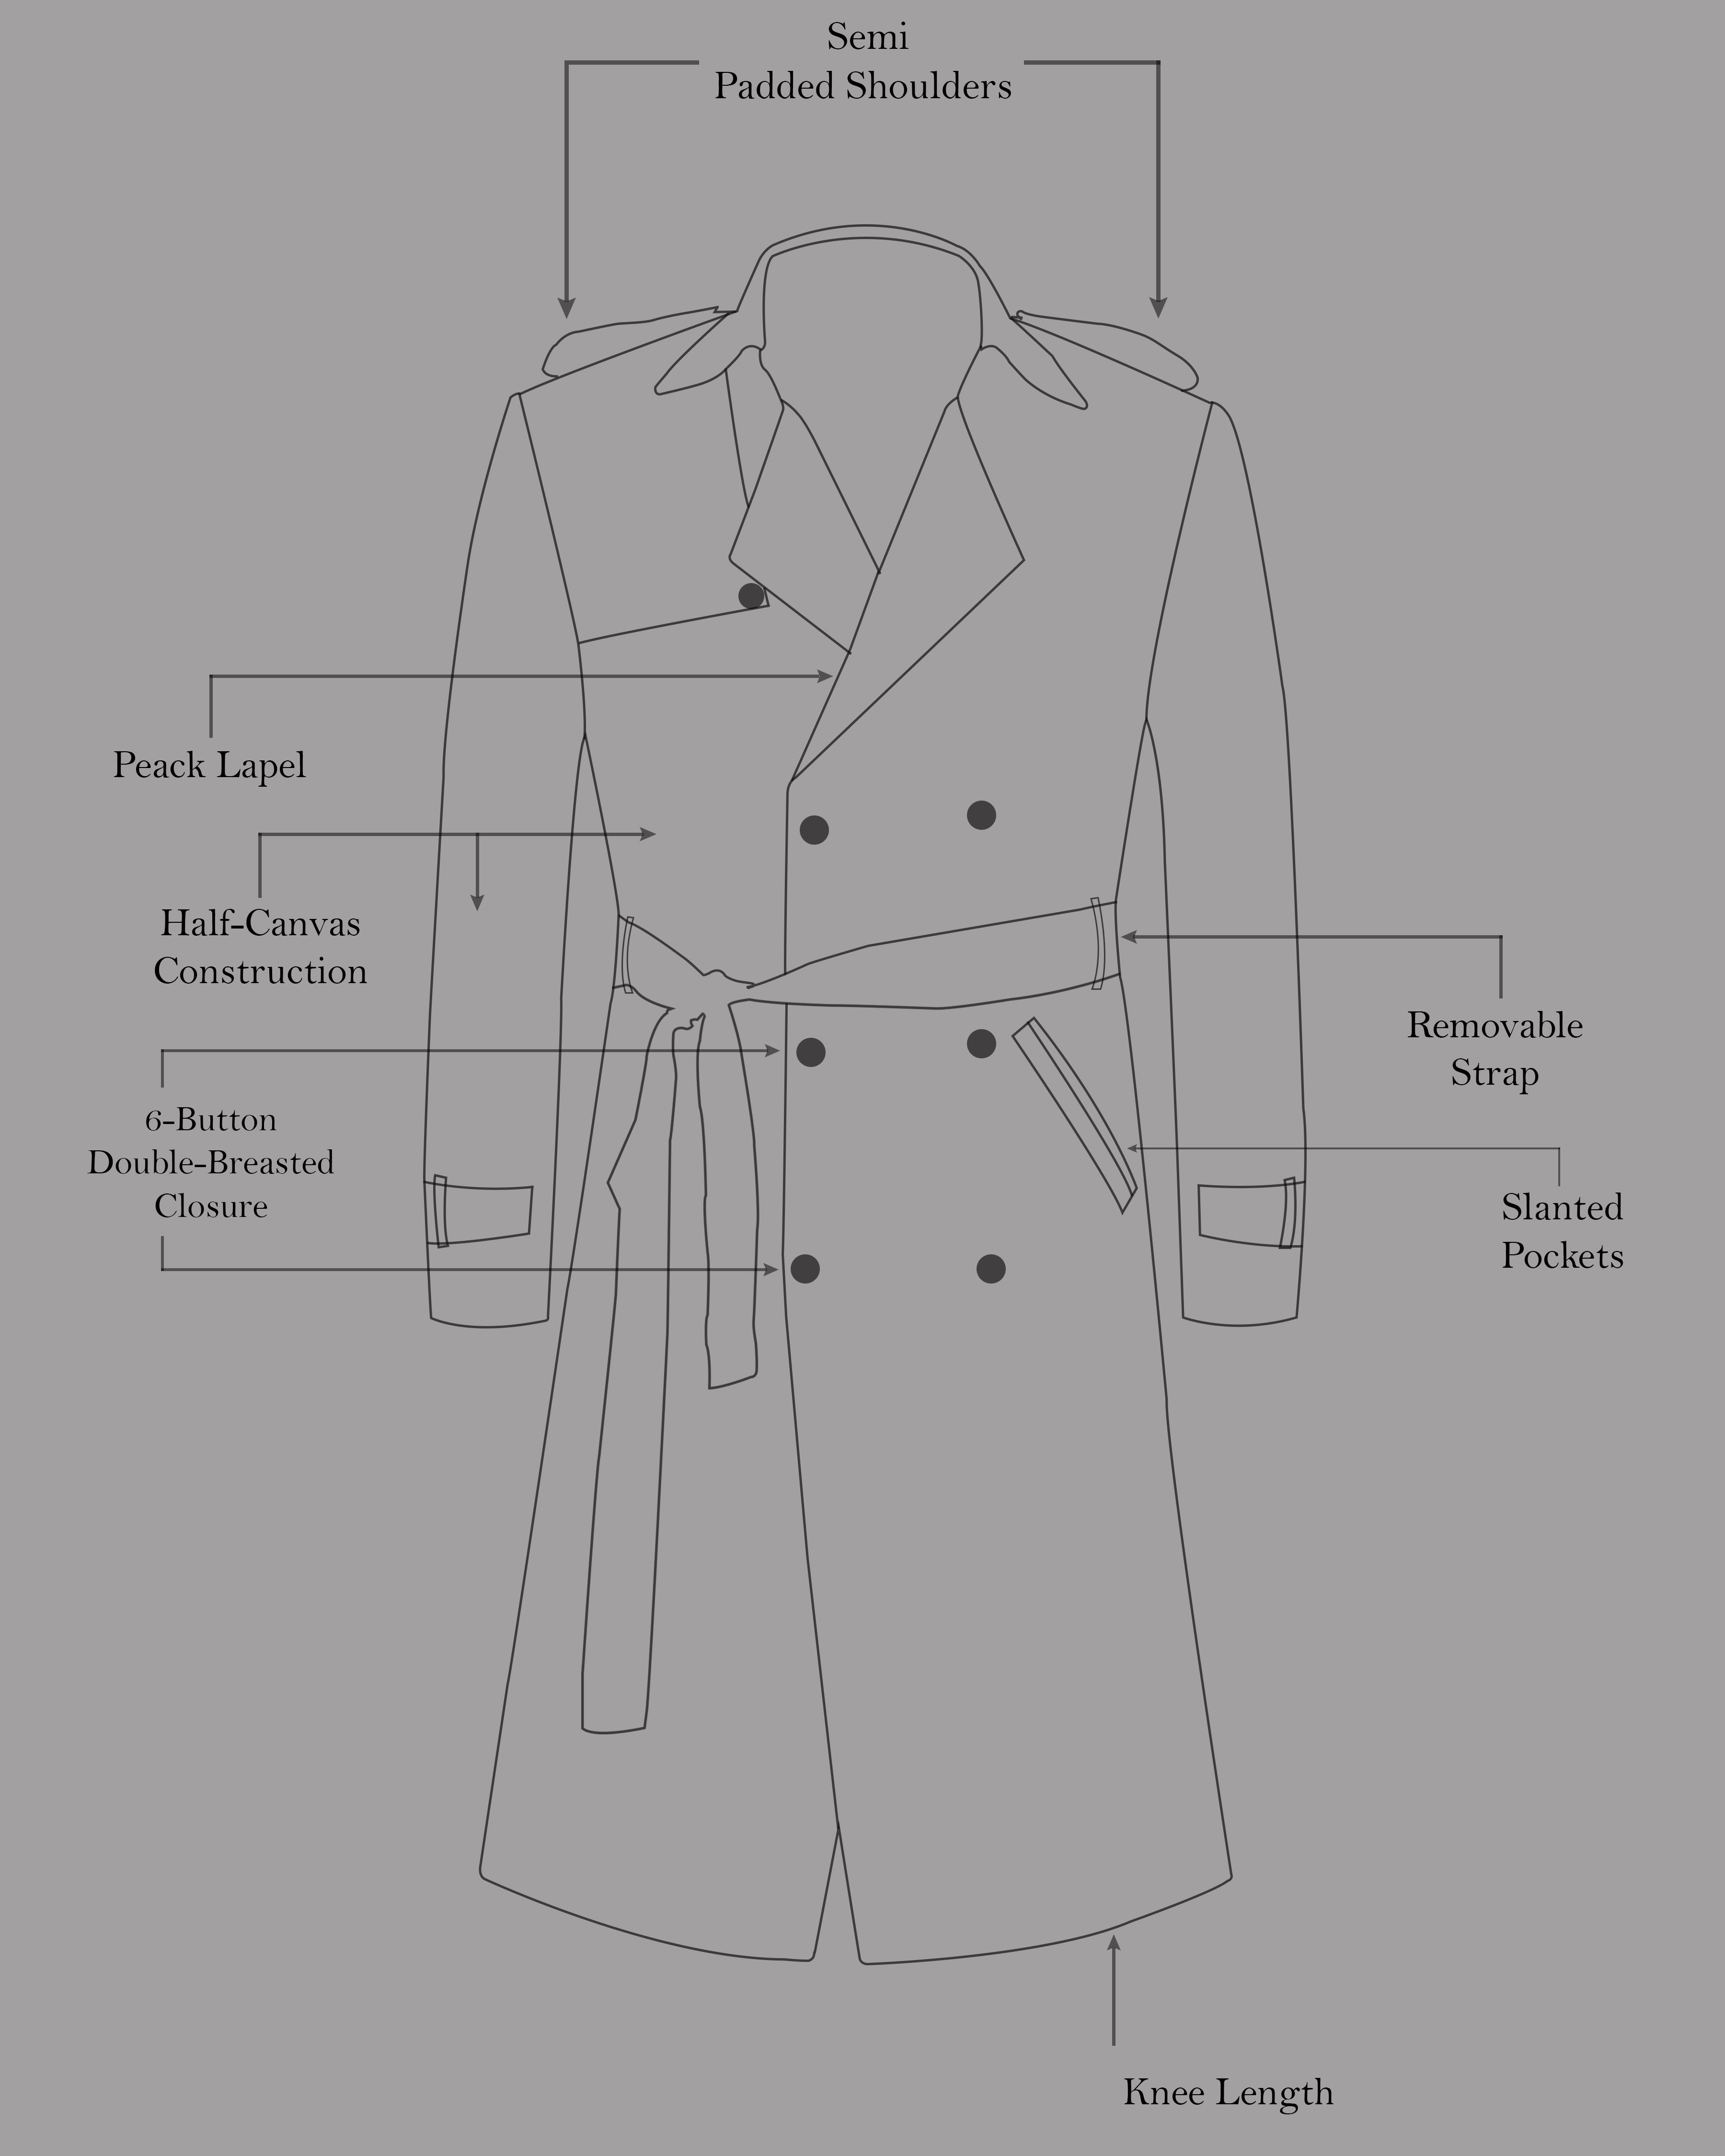 Juniper Green Double Breasted Trench Coat with Pant TCPT02-D1-36, TCPT02-D1-38, TCPT02-D1-40, TCPT02-D1-42, TCPT02-D1-44, TCPT02-D1-46, TCPT02-D1-48, TCPT02-D1-50, TCPT02-D1-52, TCPT02-D1-54, TCPT02-D1-56, TCPT02-D1-58, TCPT02-D1-60